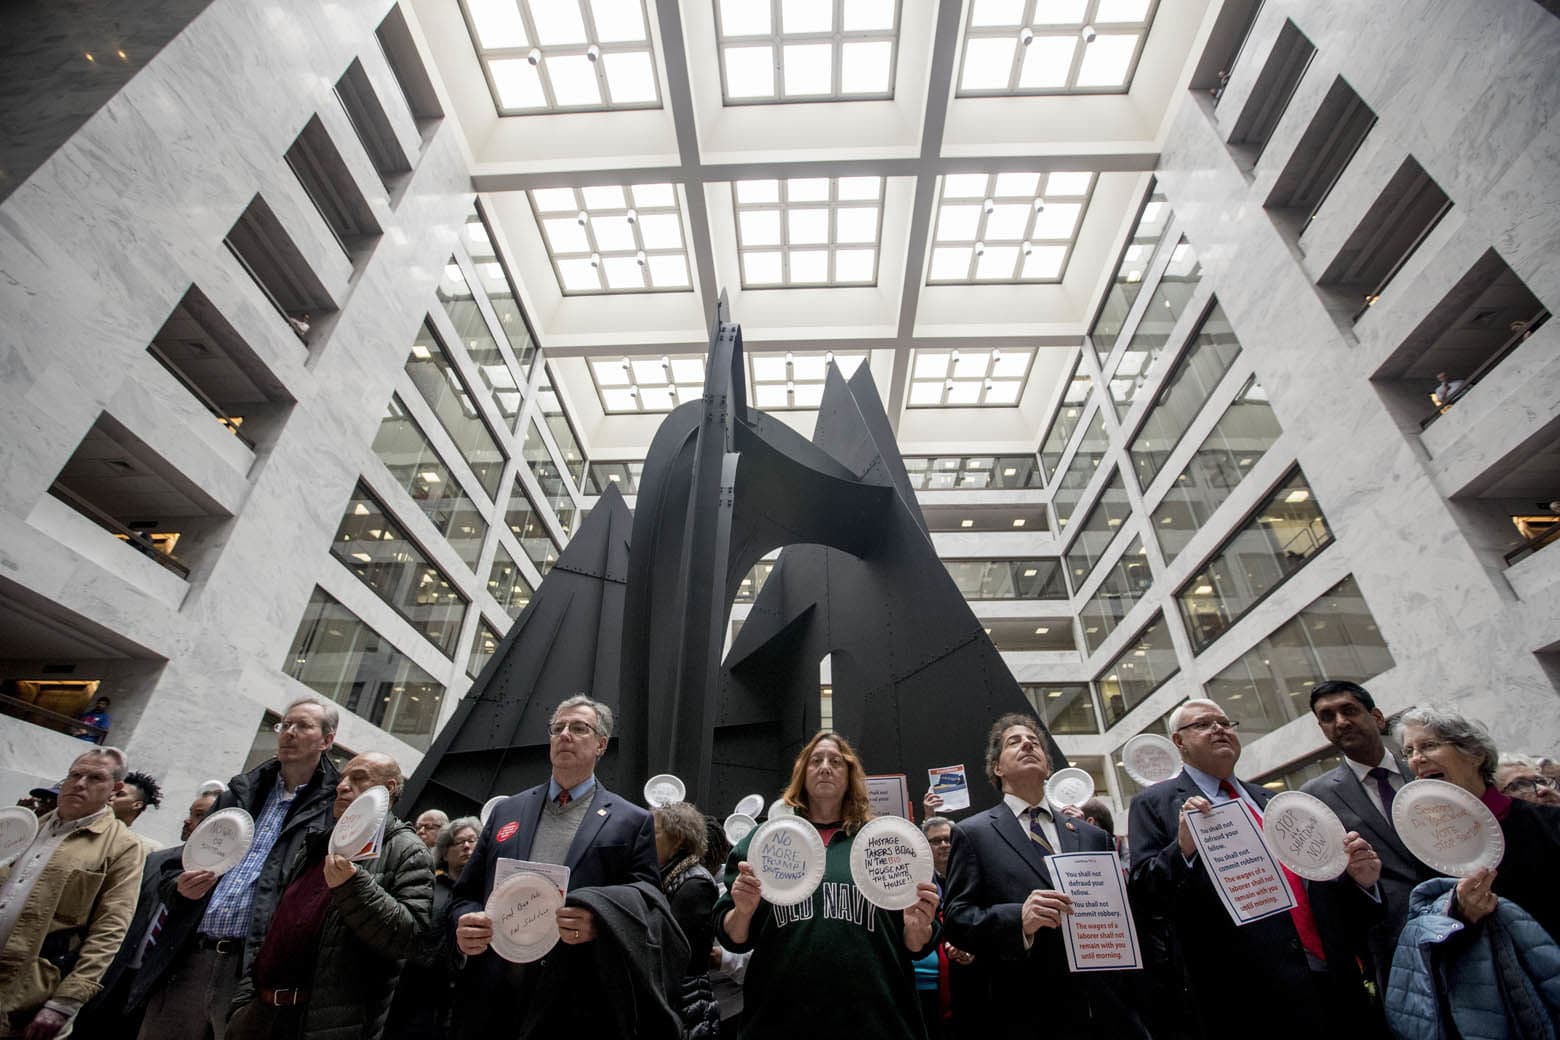 Furloughed government workers affected by the shutdown hold a silent protest against the ongoing partial government shutdown on Capitol Hill in Washington, Wednesday, Jan. 23, 2019. (AP Photo/Andrew Harnik)